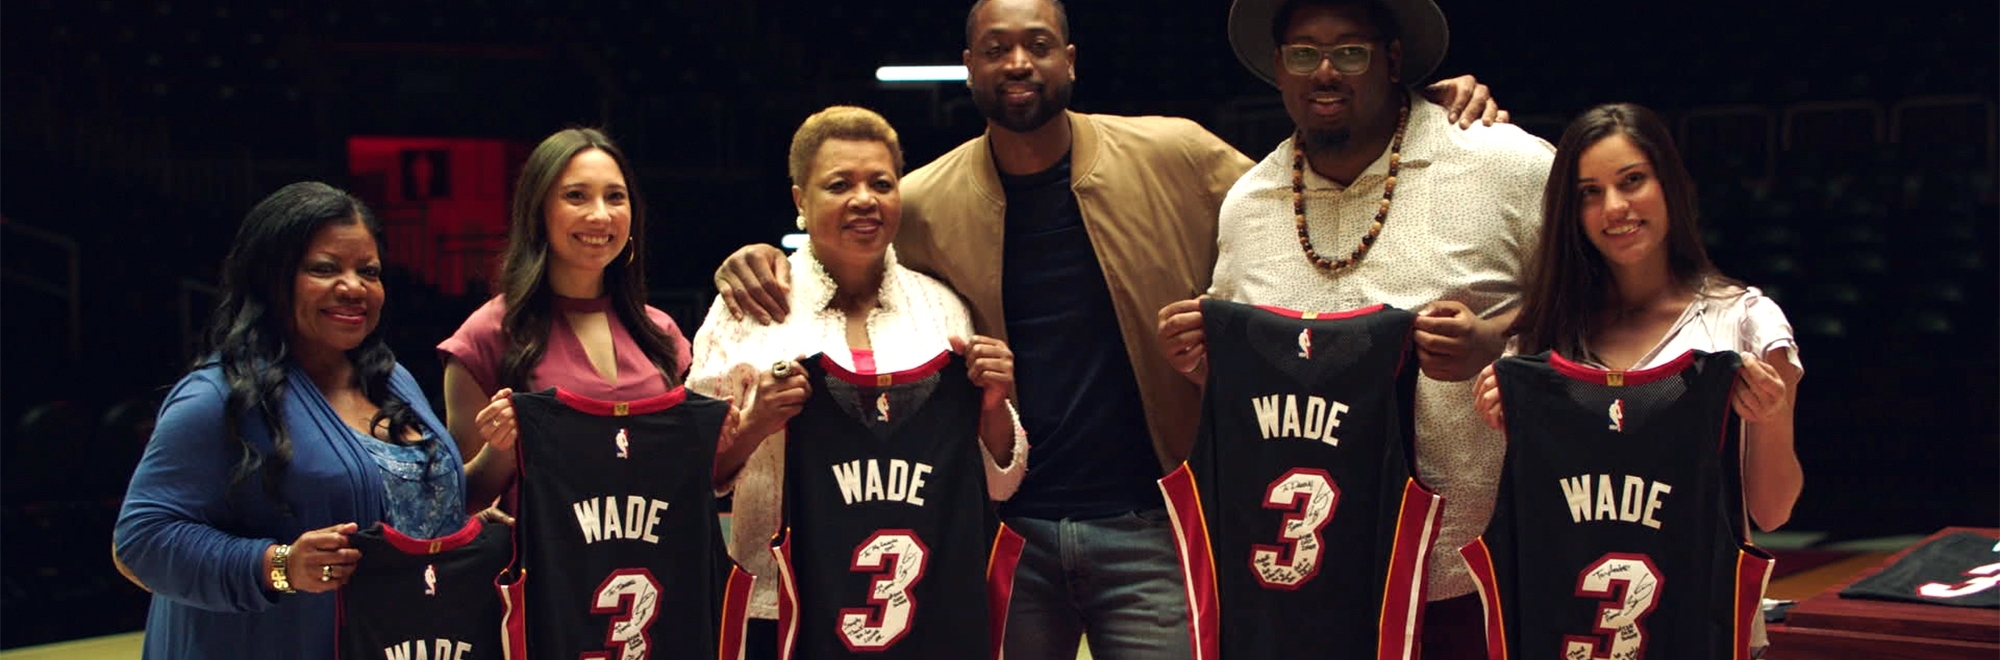 It's a slam dunk for Bud in this emotional film starring the NBA's Dwyane Wade